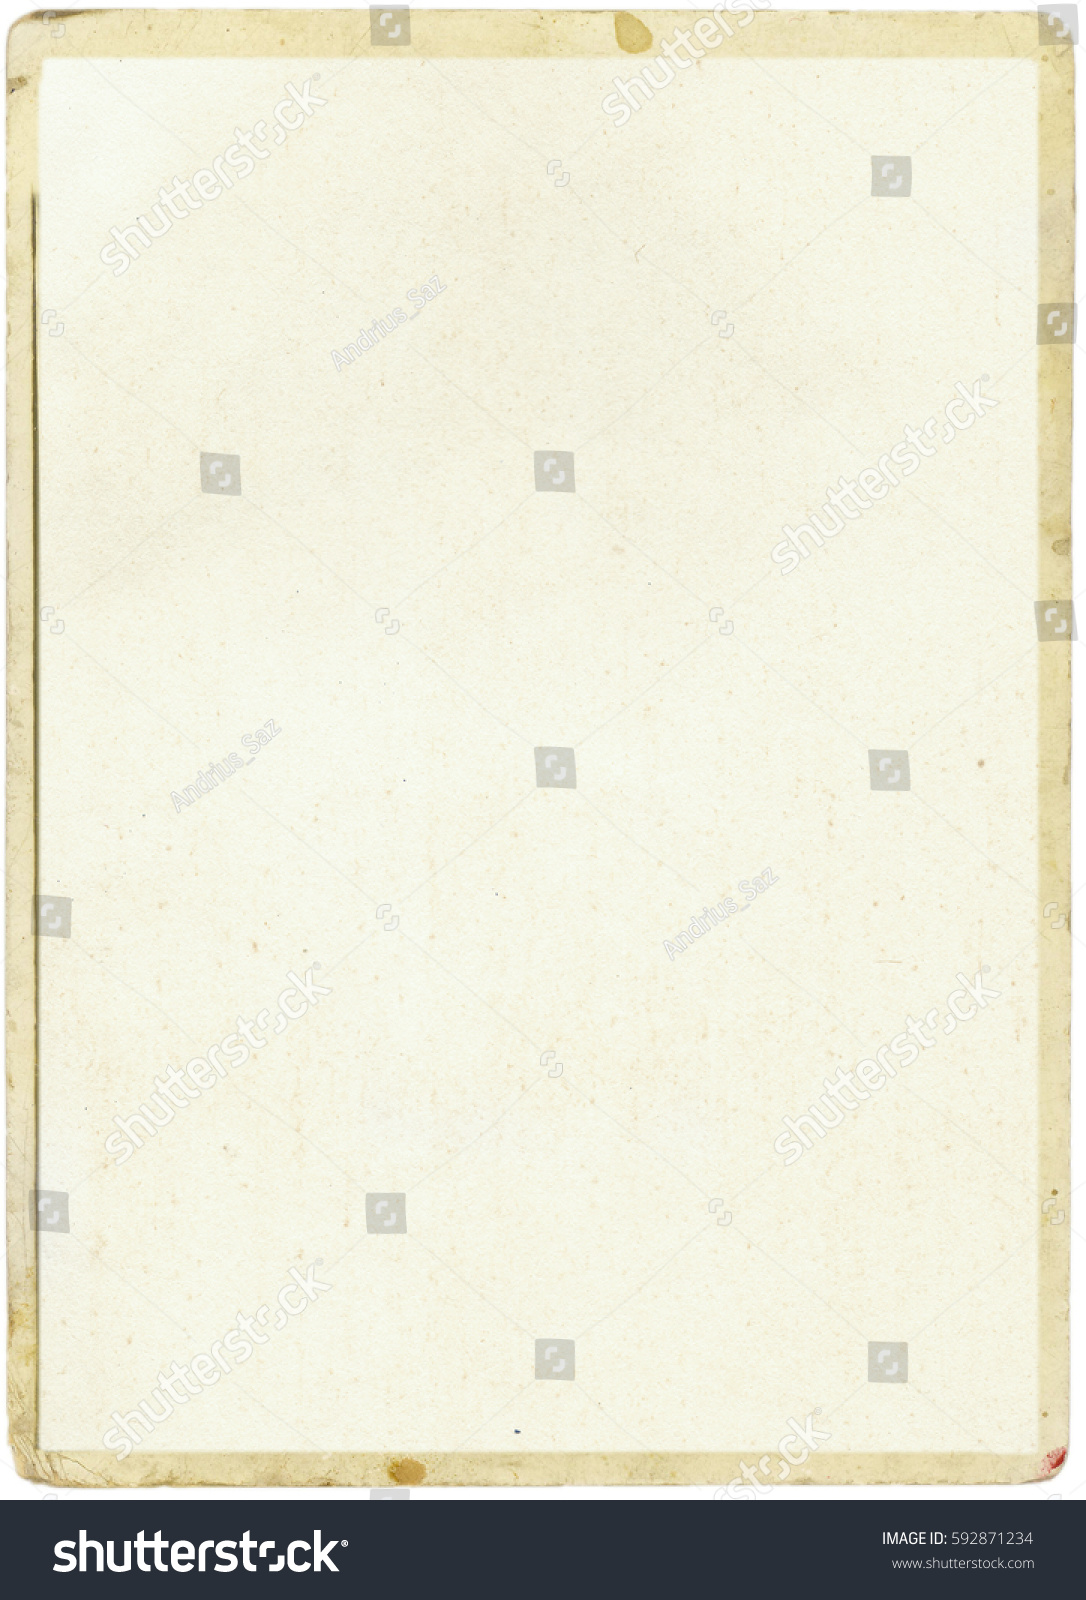 brown empty old vintage paper background. Paper texture #592871234